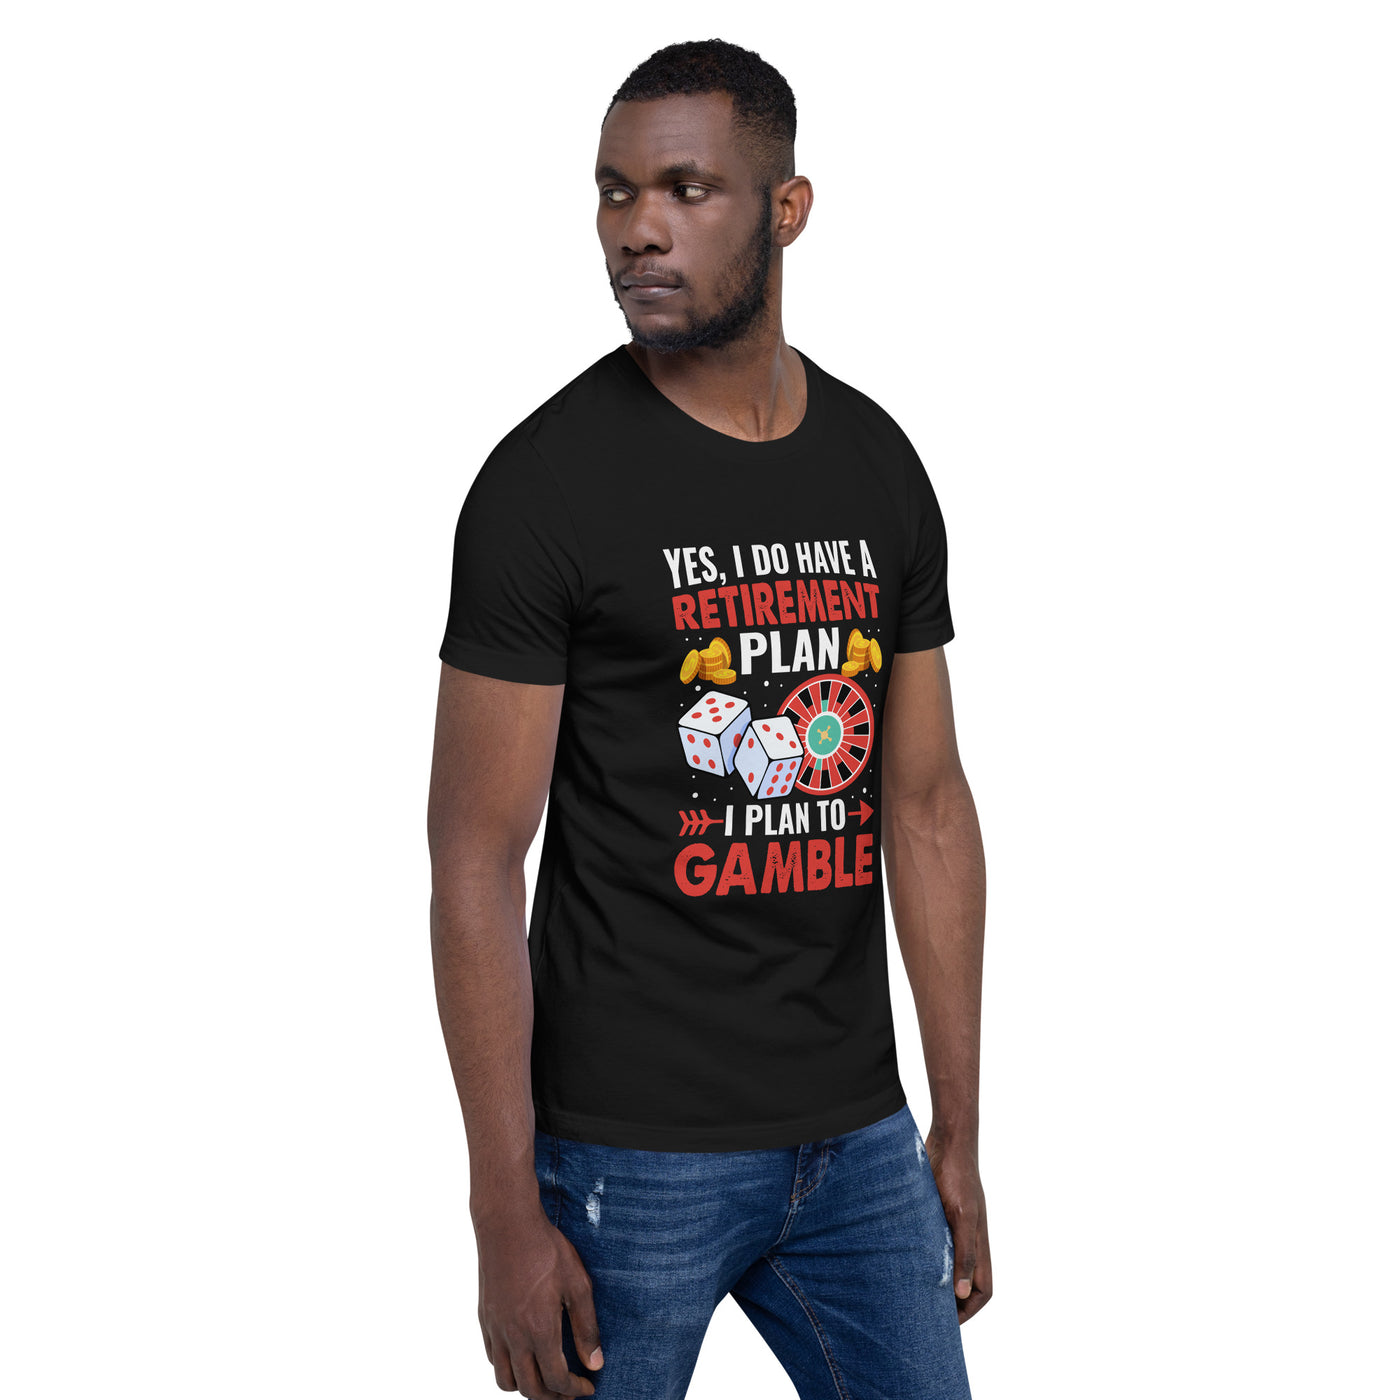 I Have a Retirement Plan; I Plan to Gamble - Unisex t-shirt